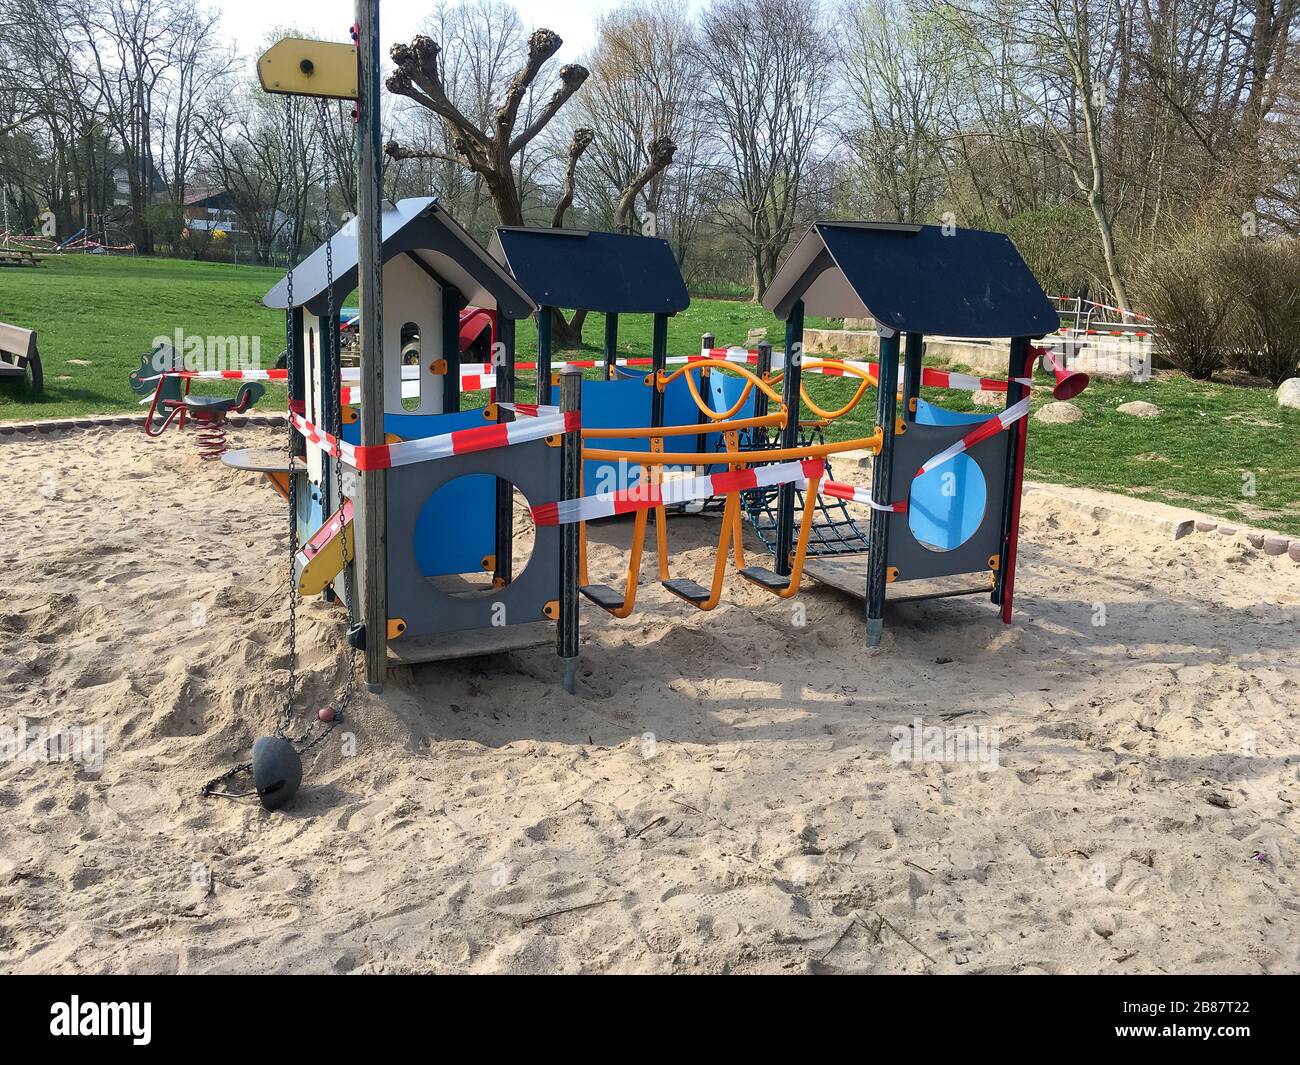 ESCHBORN, GERMANY - March 20 2020: A children's playground closed due to anti-corona measures Stock Photo